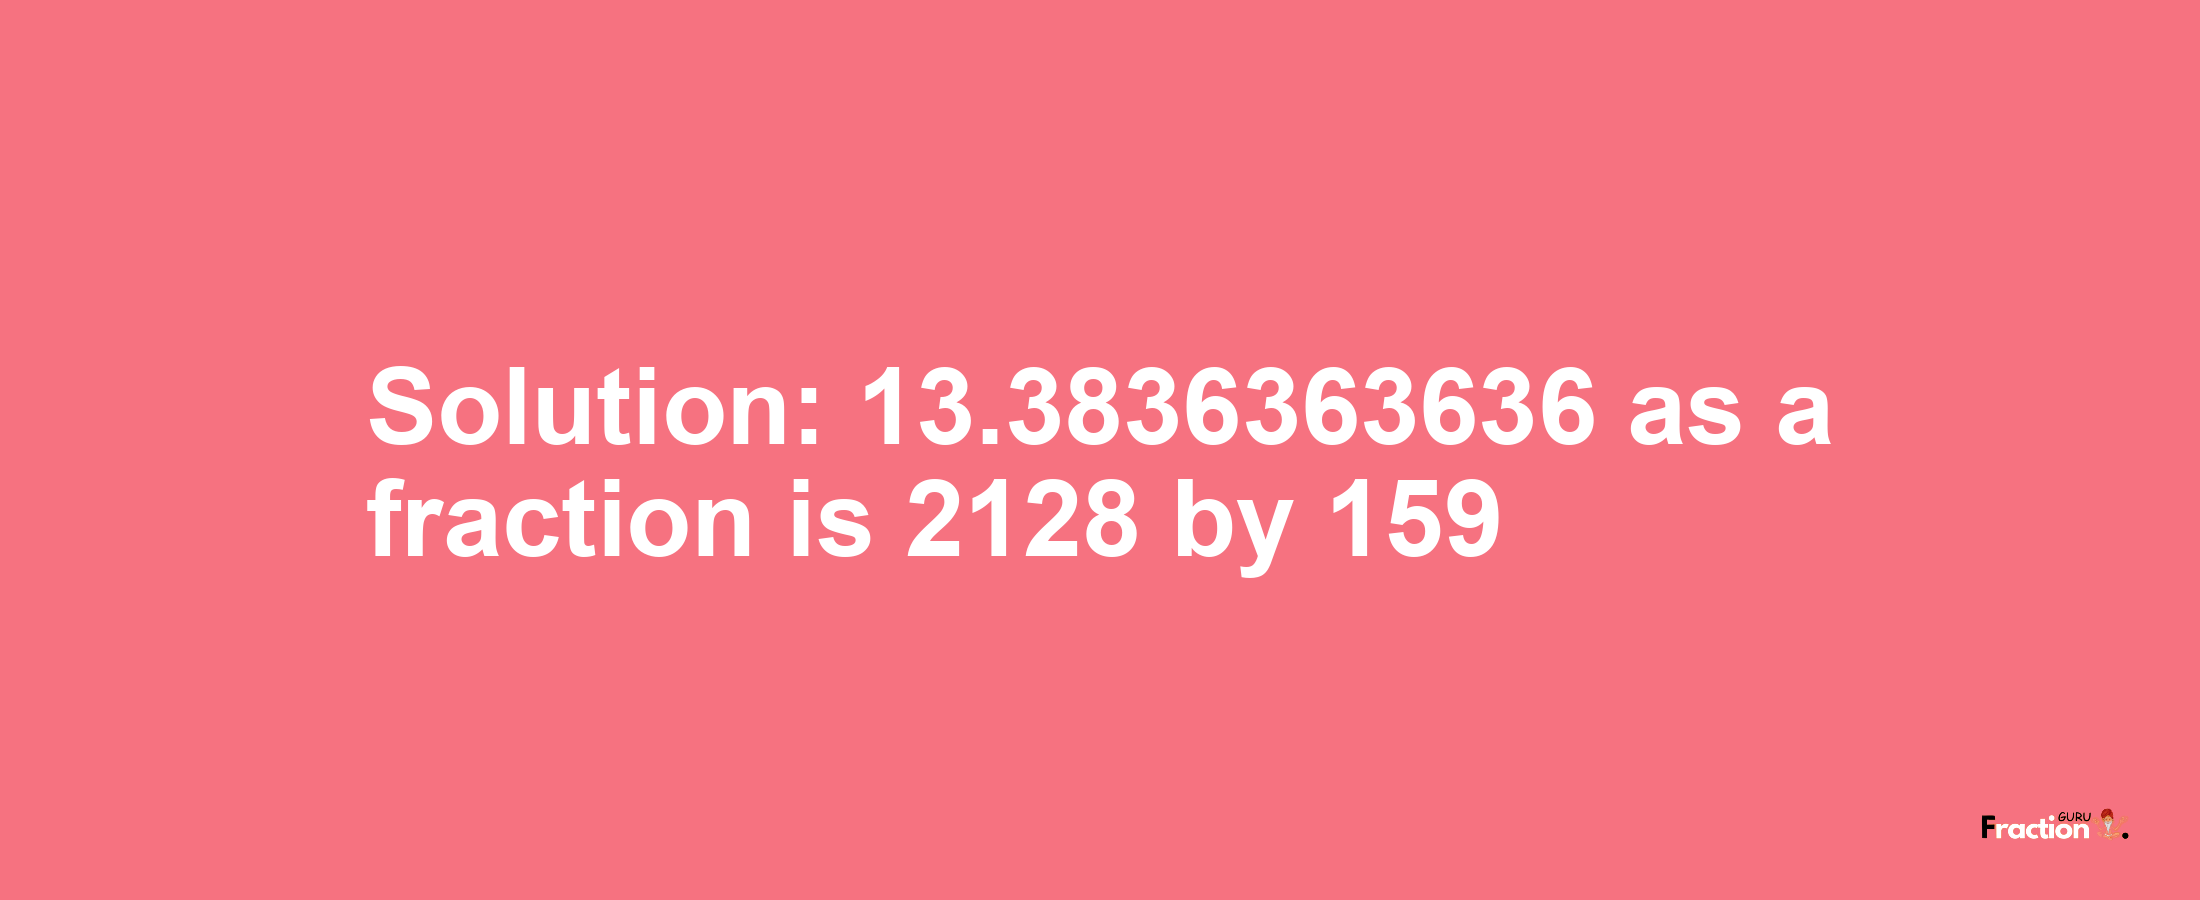 Solution:13.3836363636 as a fraction is 2128/159